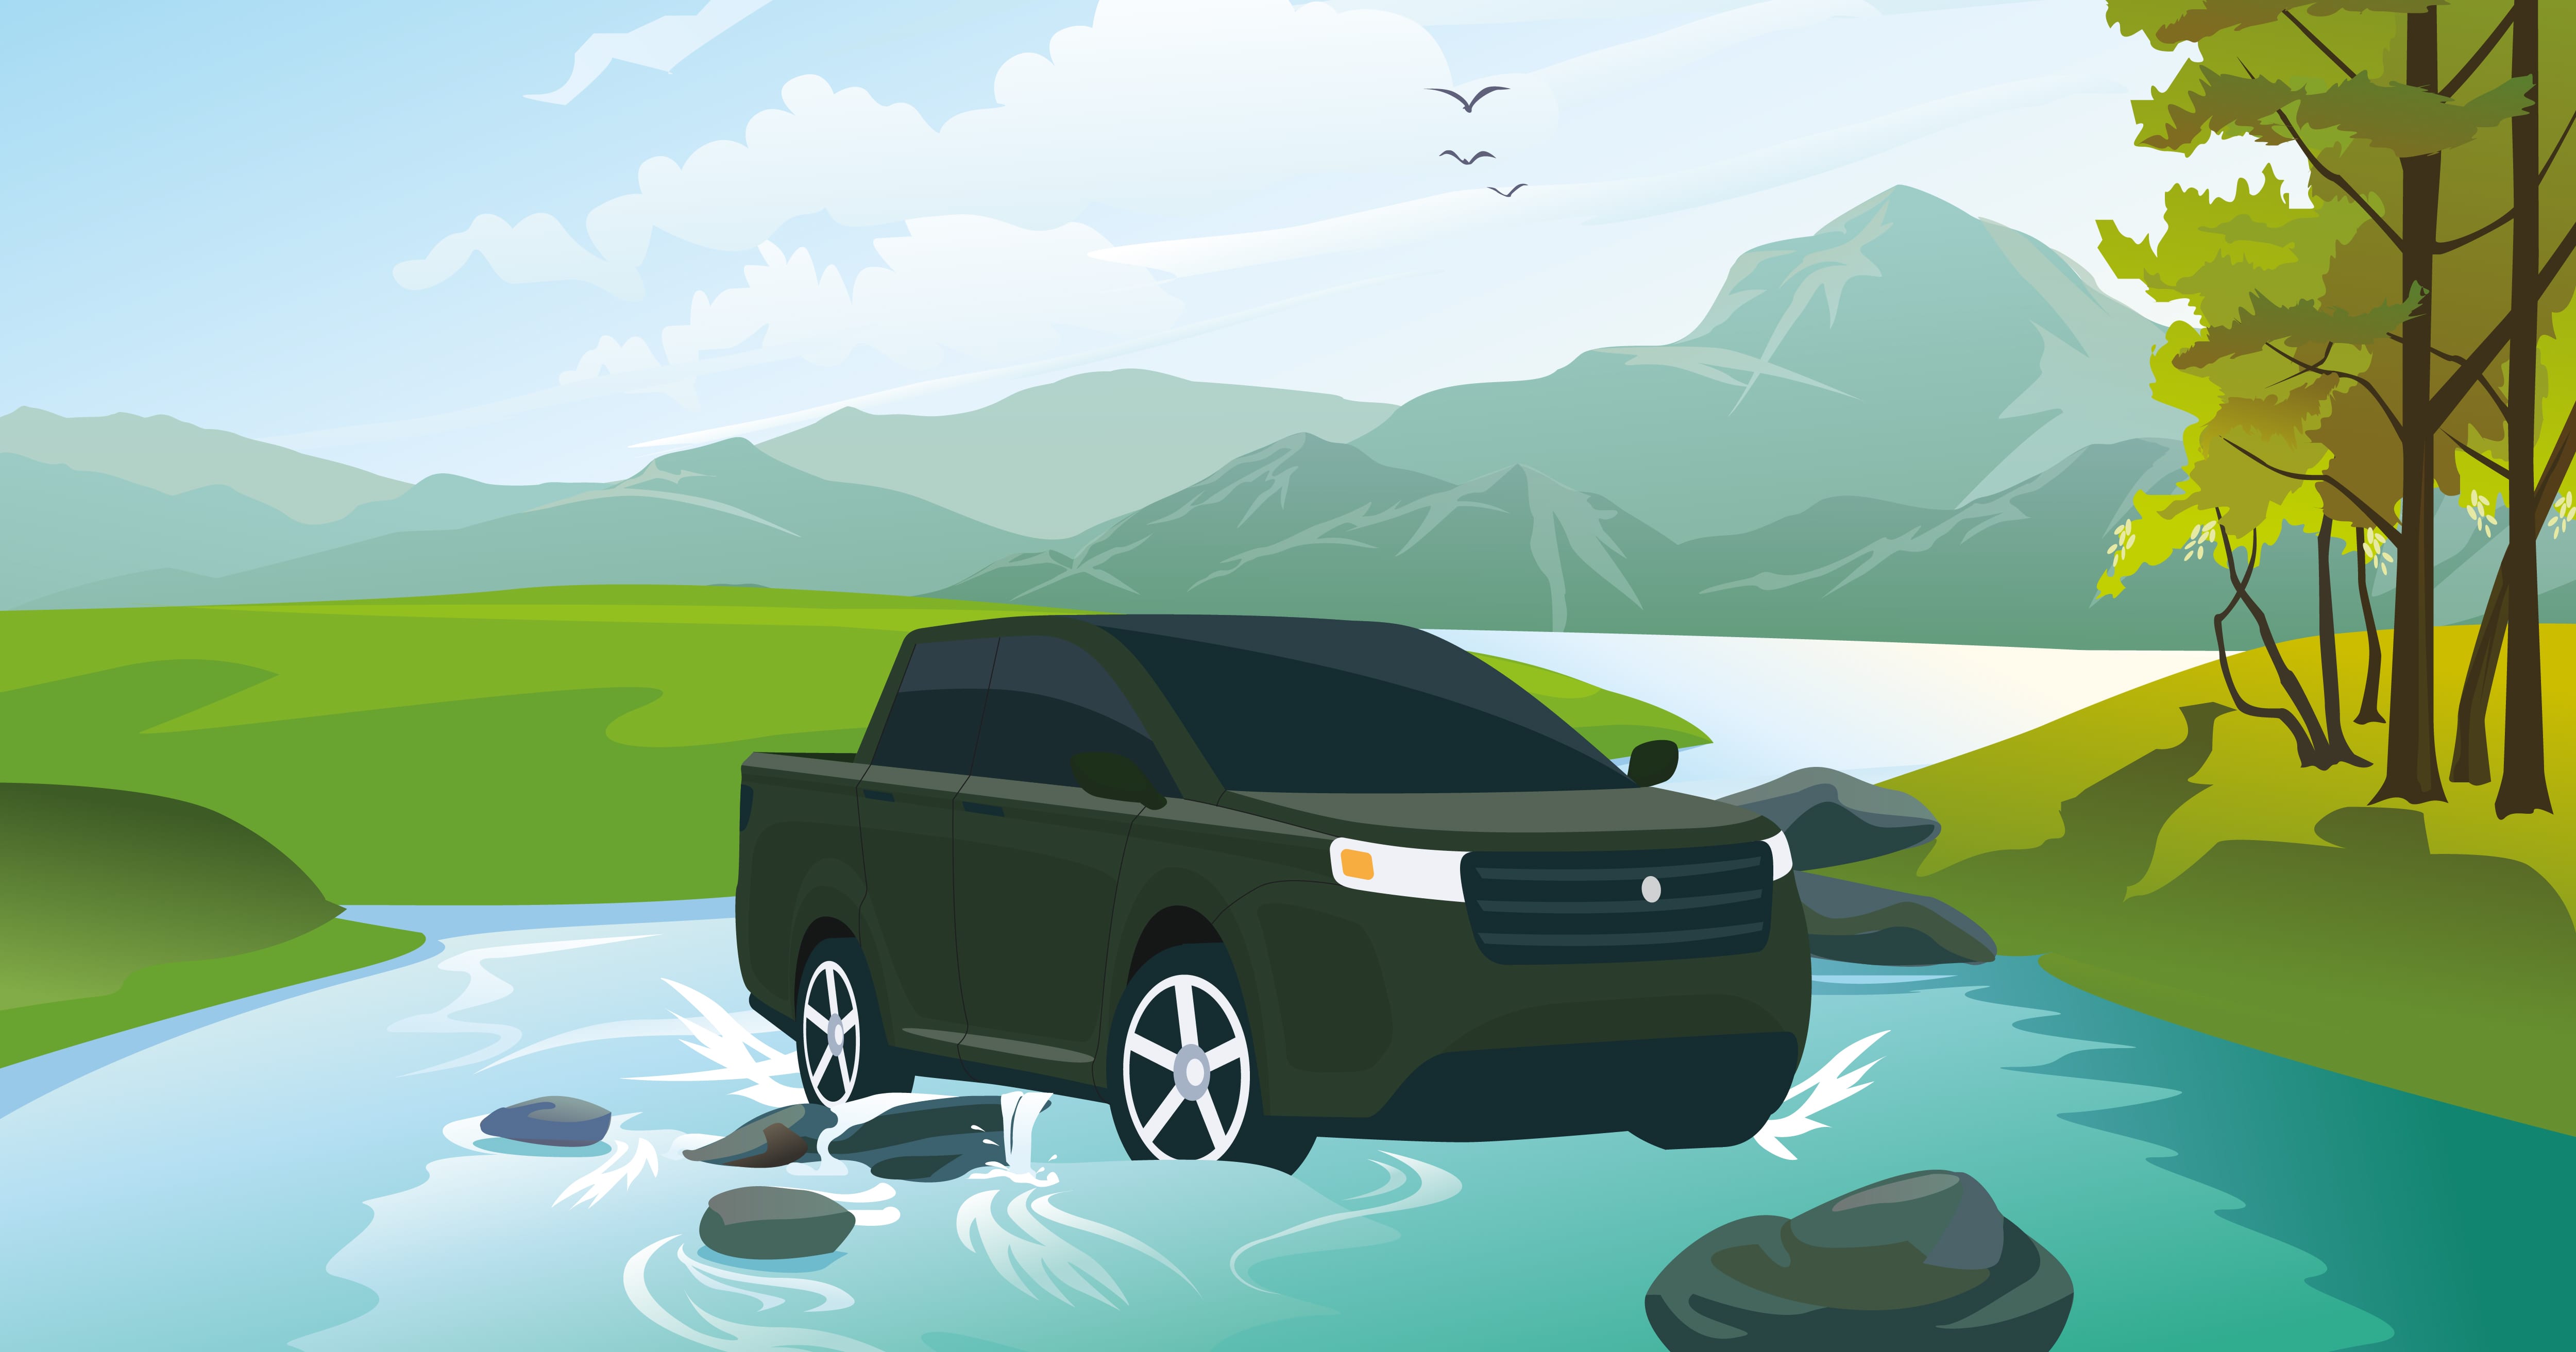 How To Drive Through Water With a 4x4 Vehicle